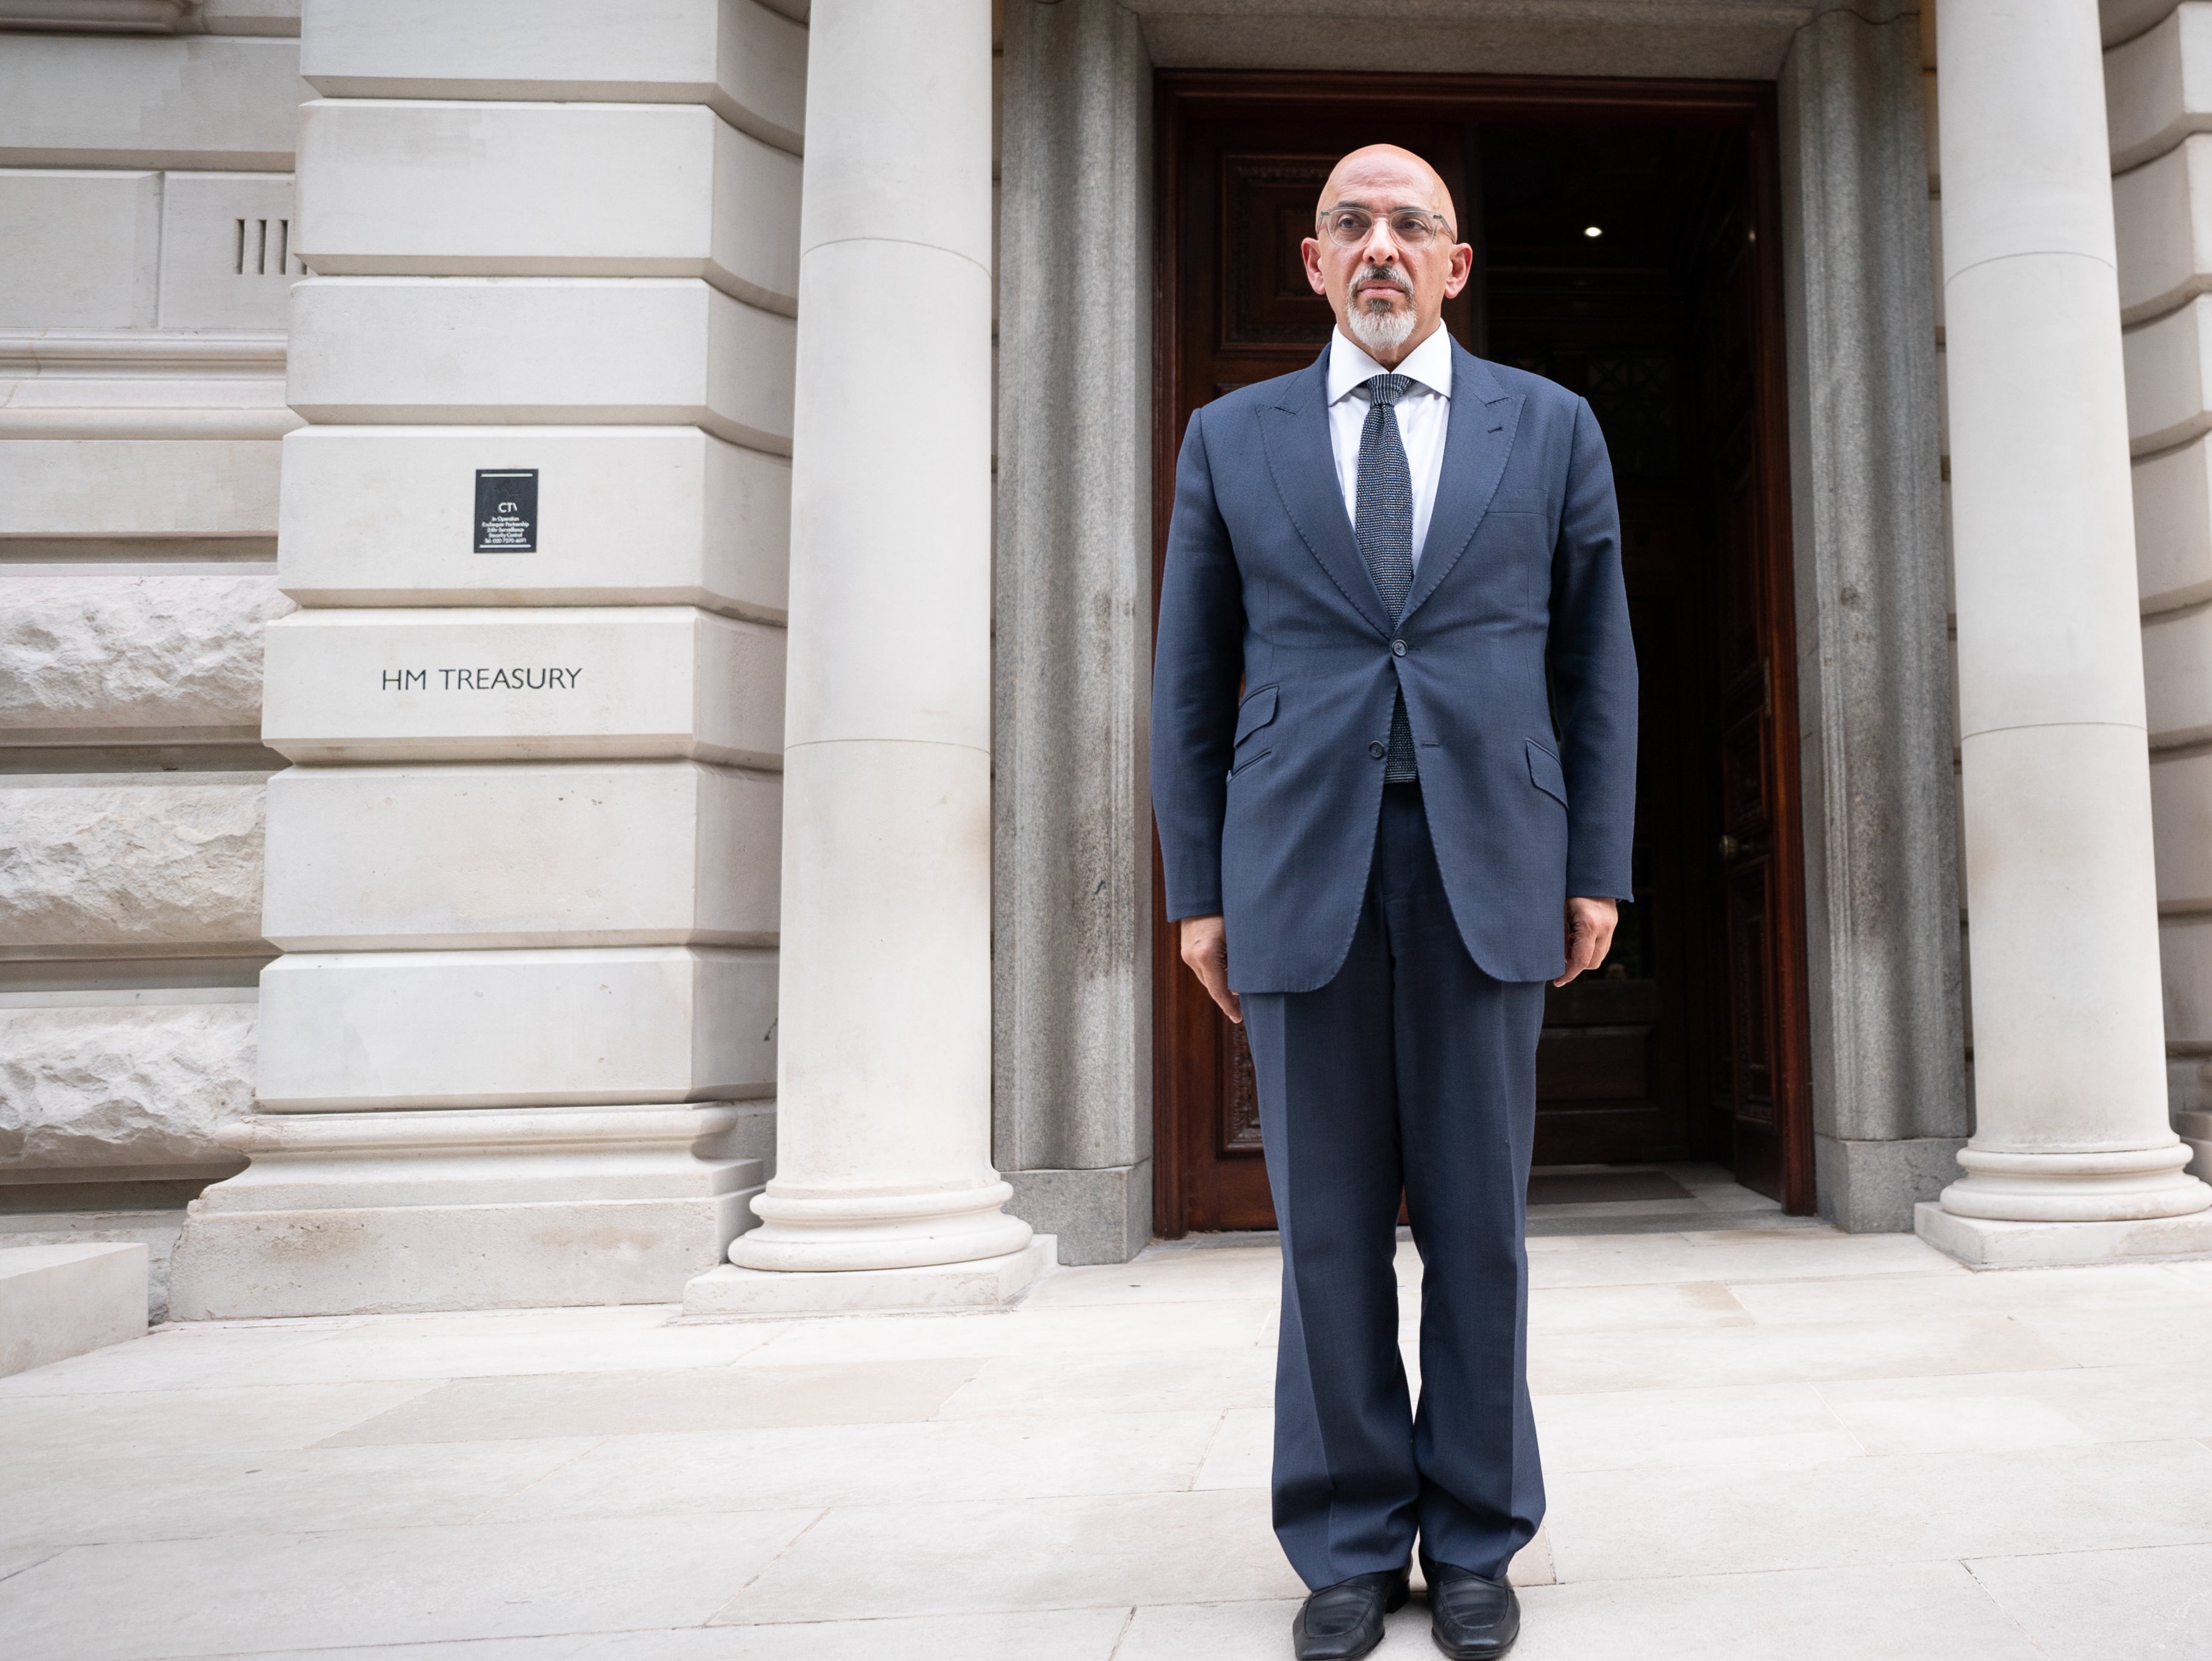 Zahawi outside HM Treasury last year after being appointed chancellor by Boris Johnson